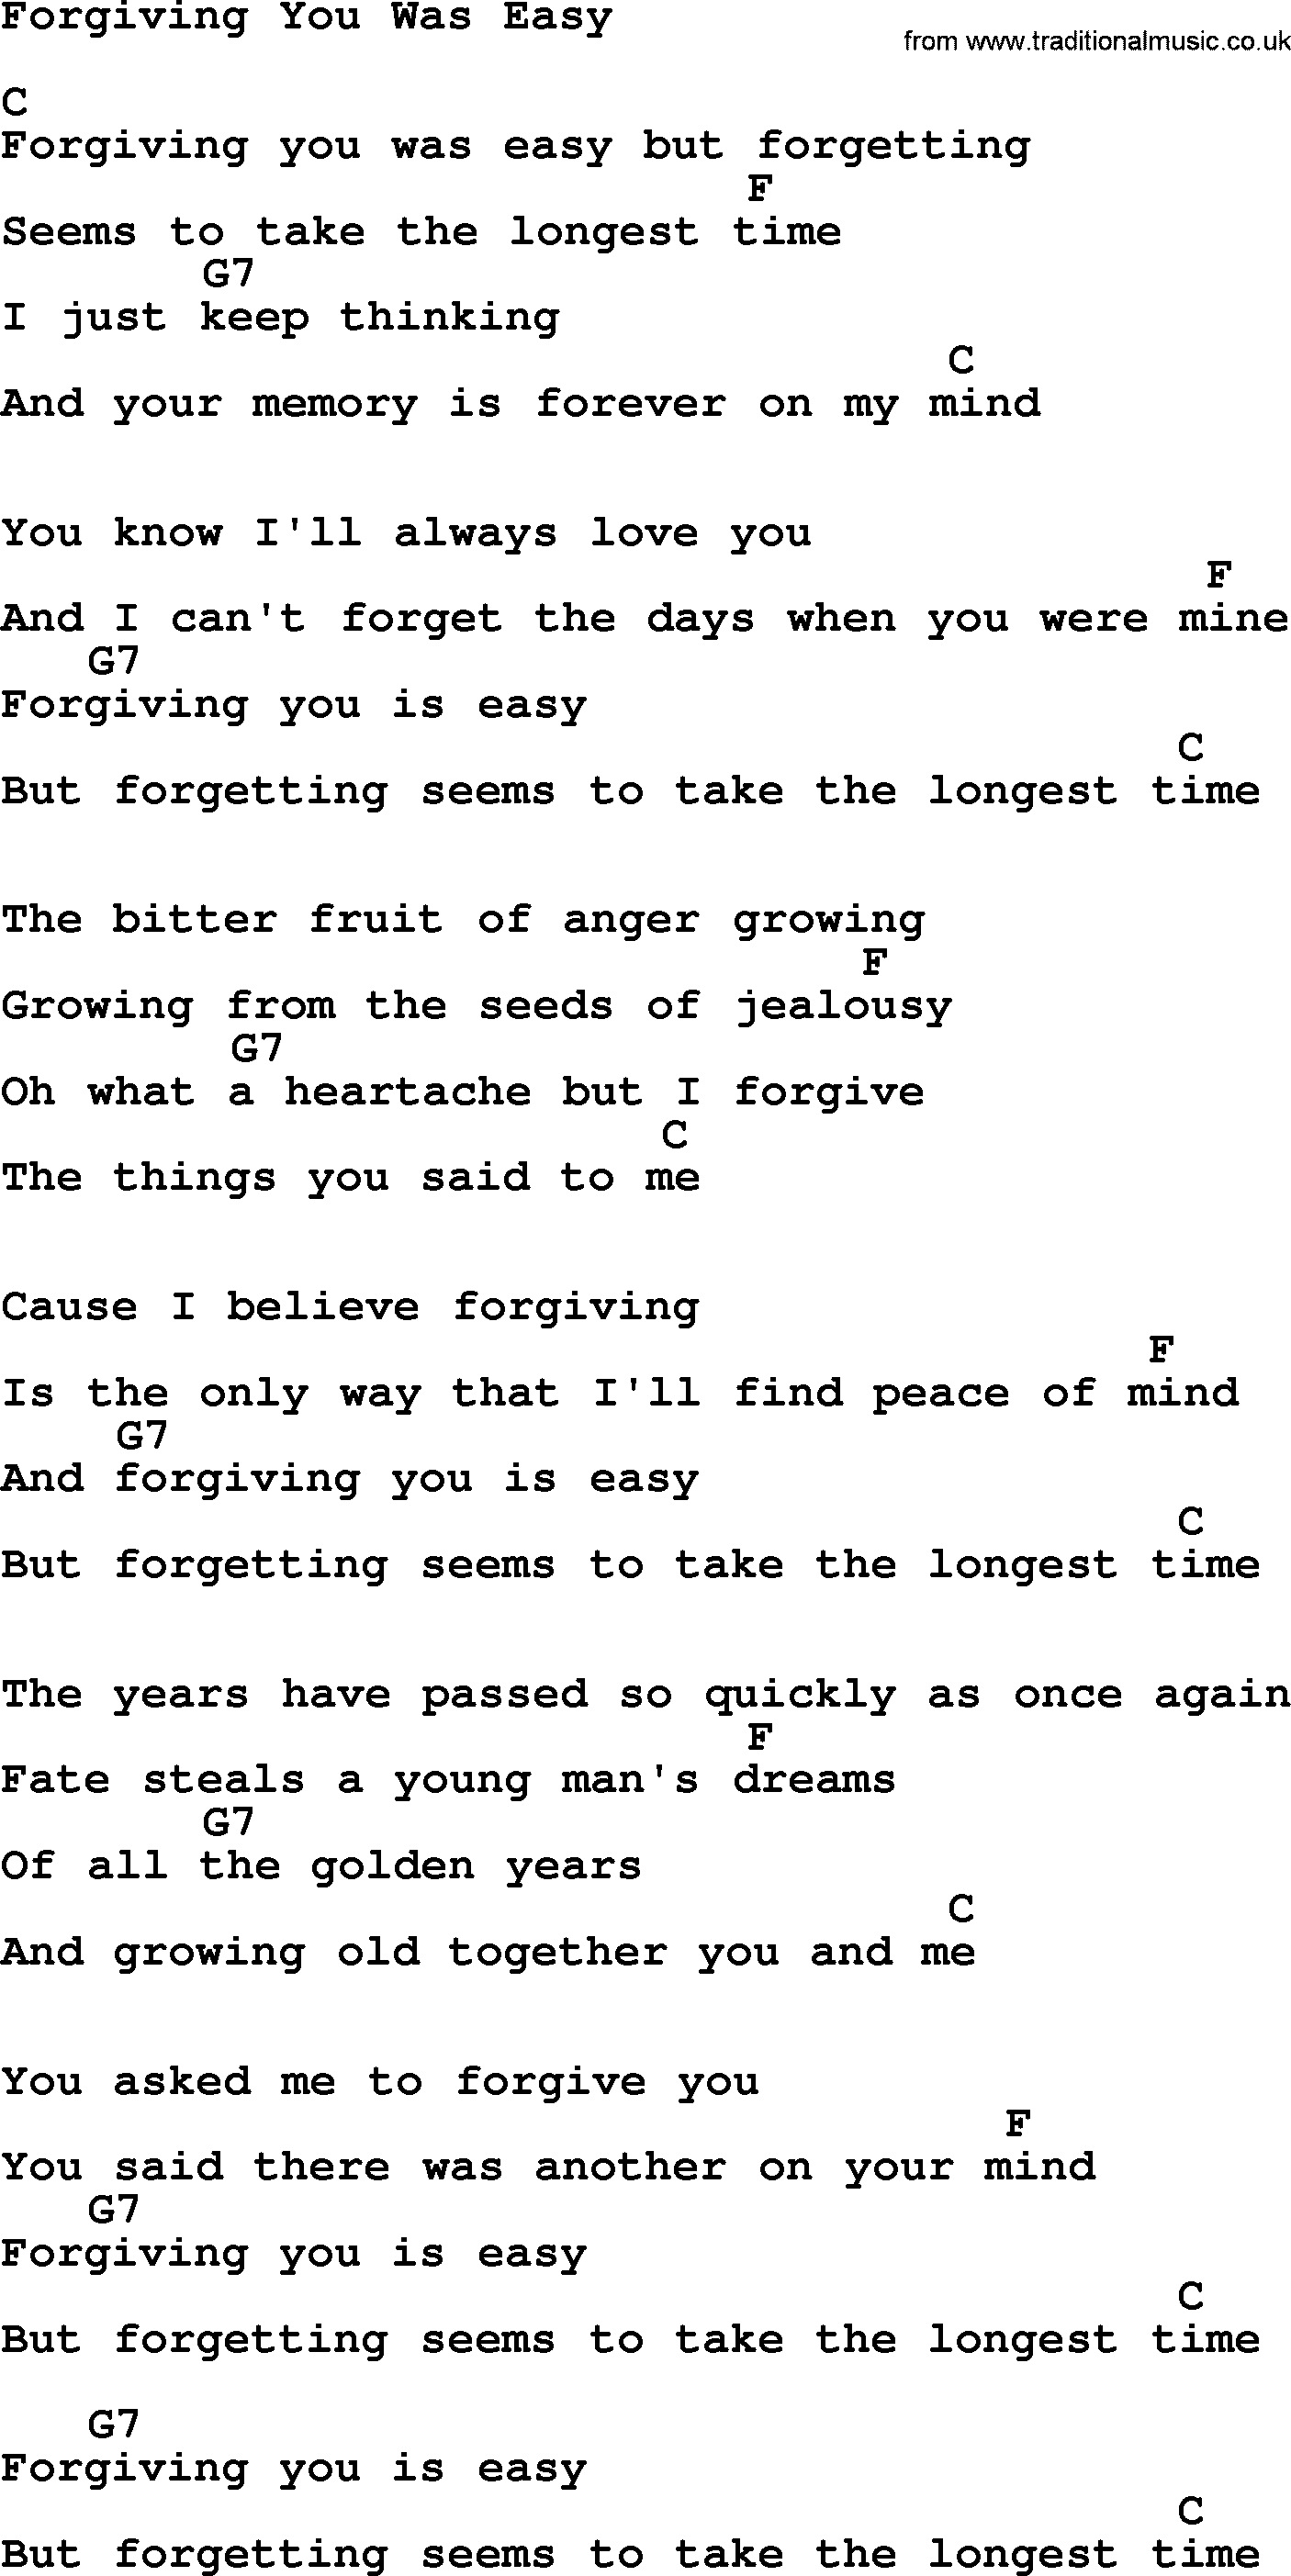 Willie Nelson song: Forgiving You Was Easy, lyrics and chords